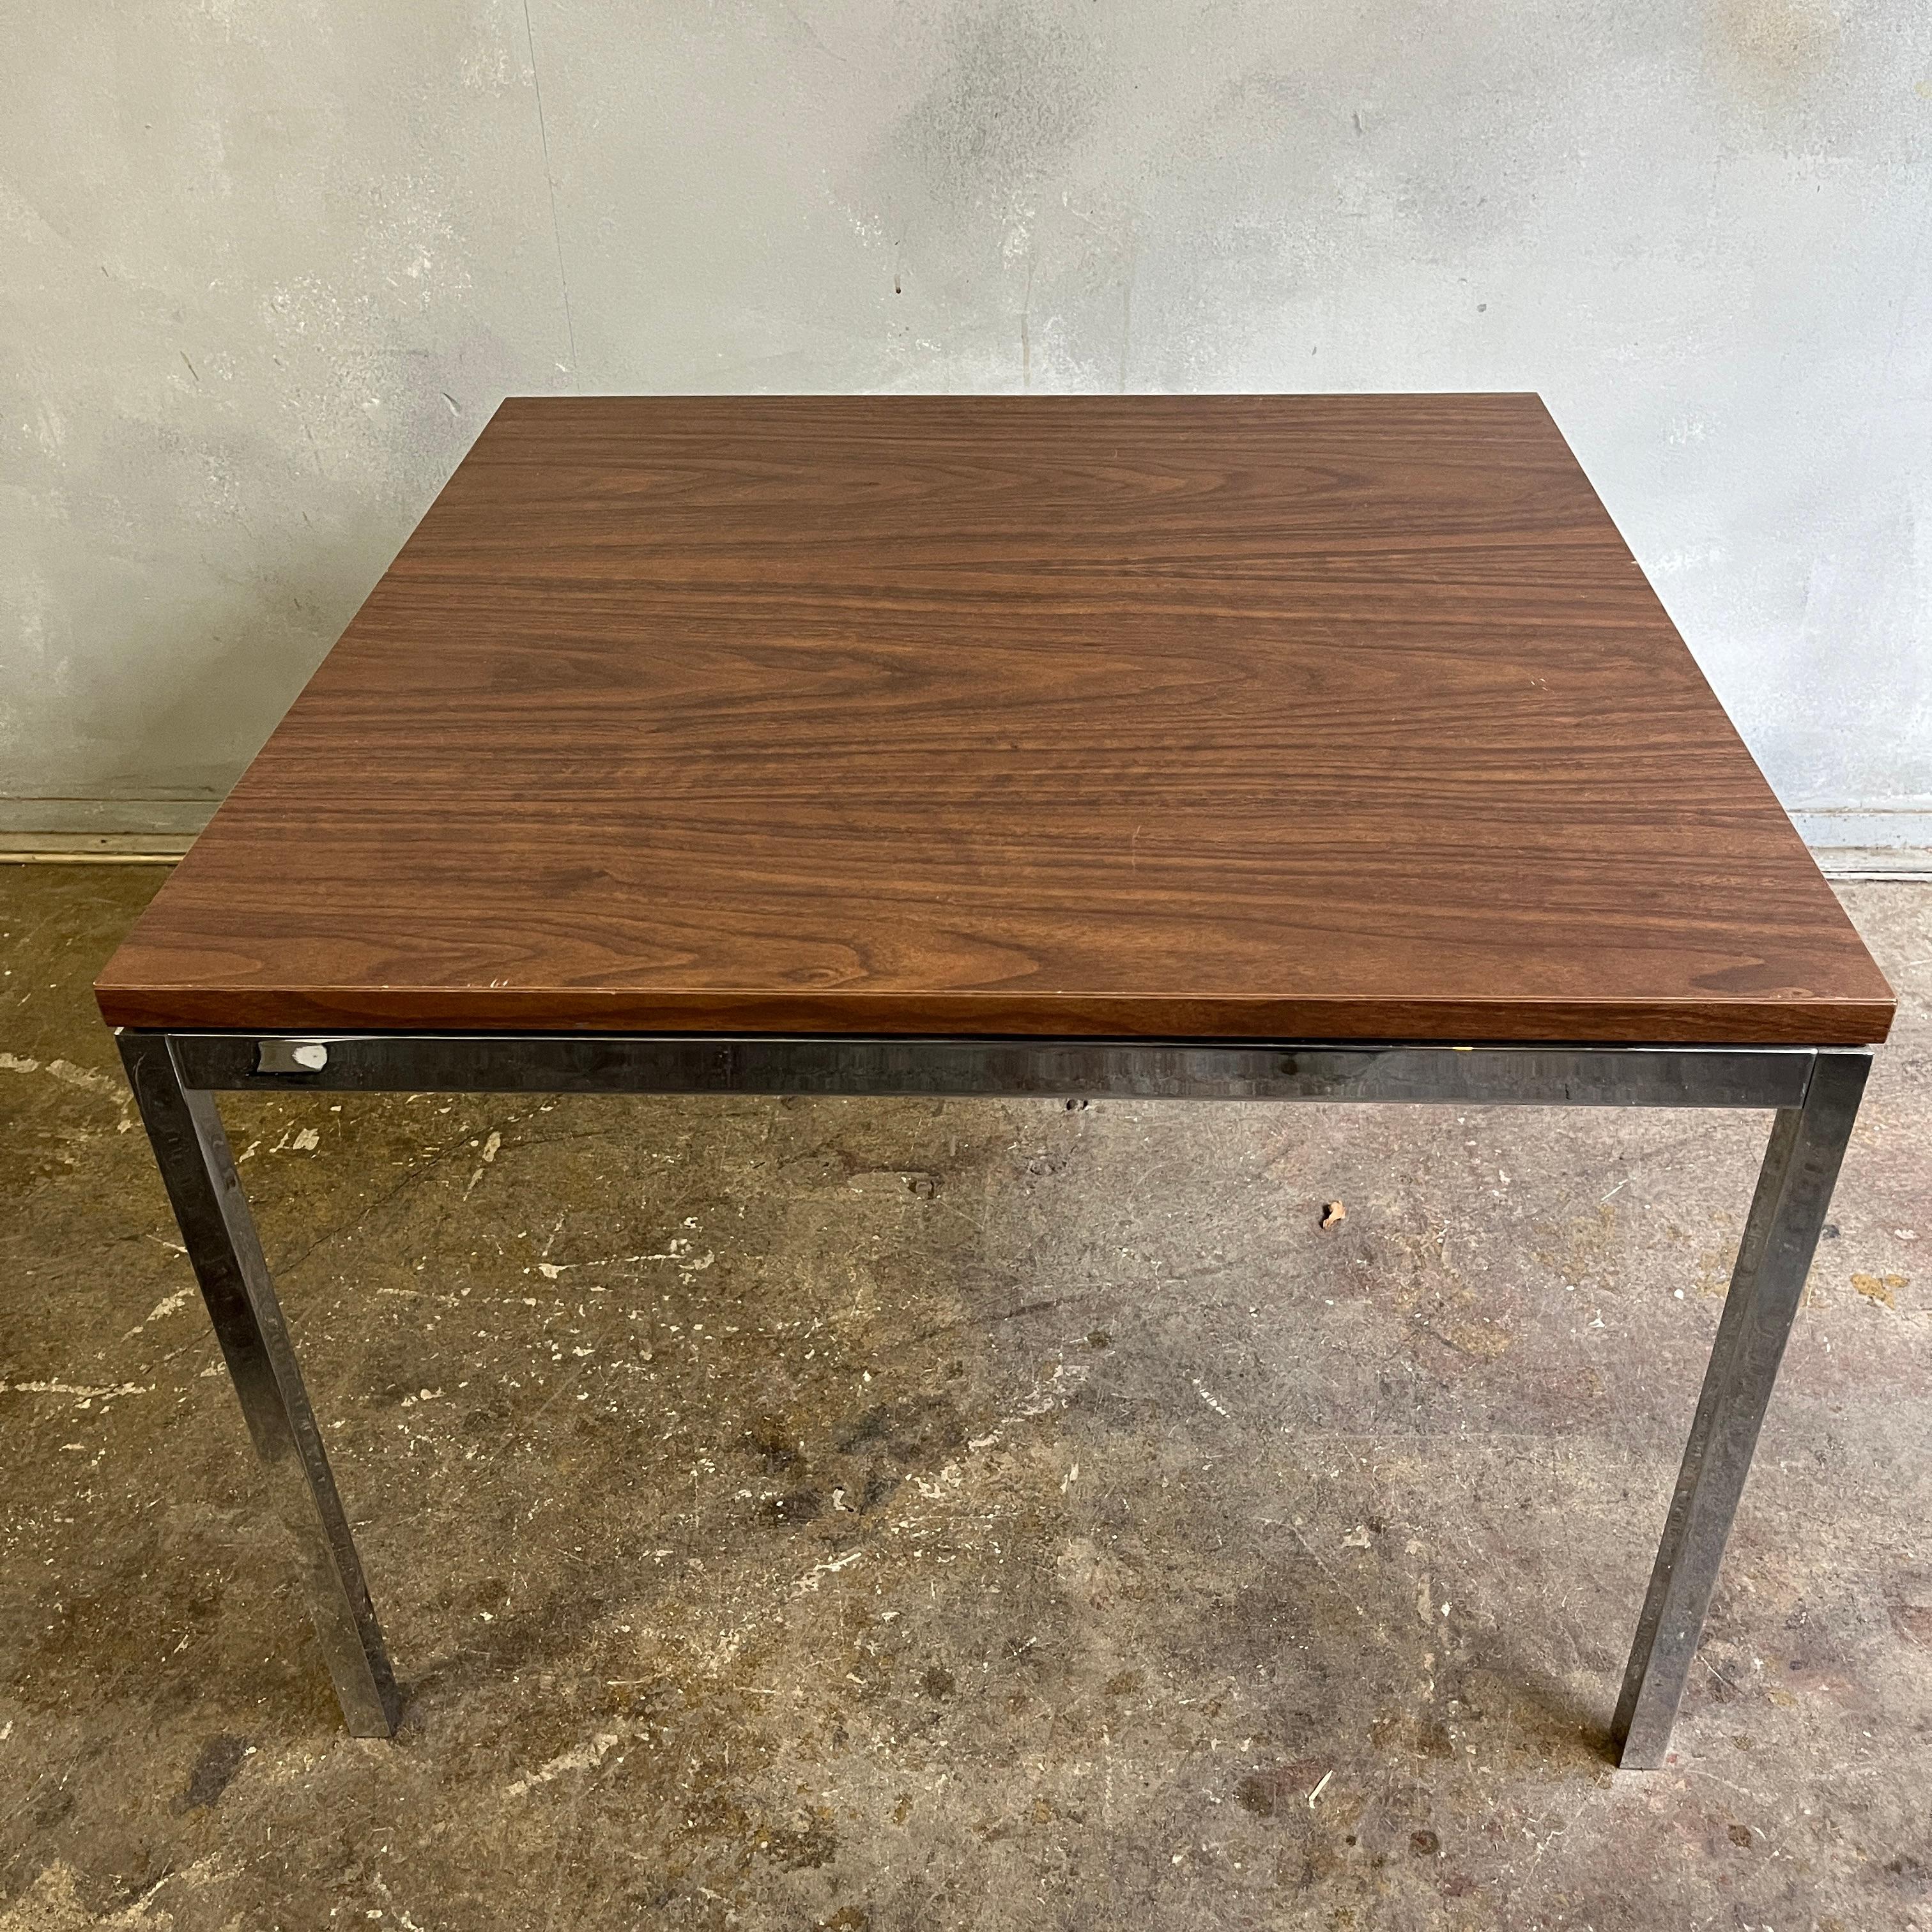 Original solid steel 24 inch square side tables by Florence Knoll with floating laminate walnut tops. We have multiple tables that can be used tide by side as a longer coffee table. Tops are also removable to fit marble tops.